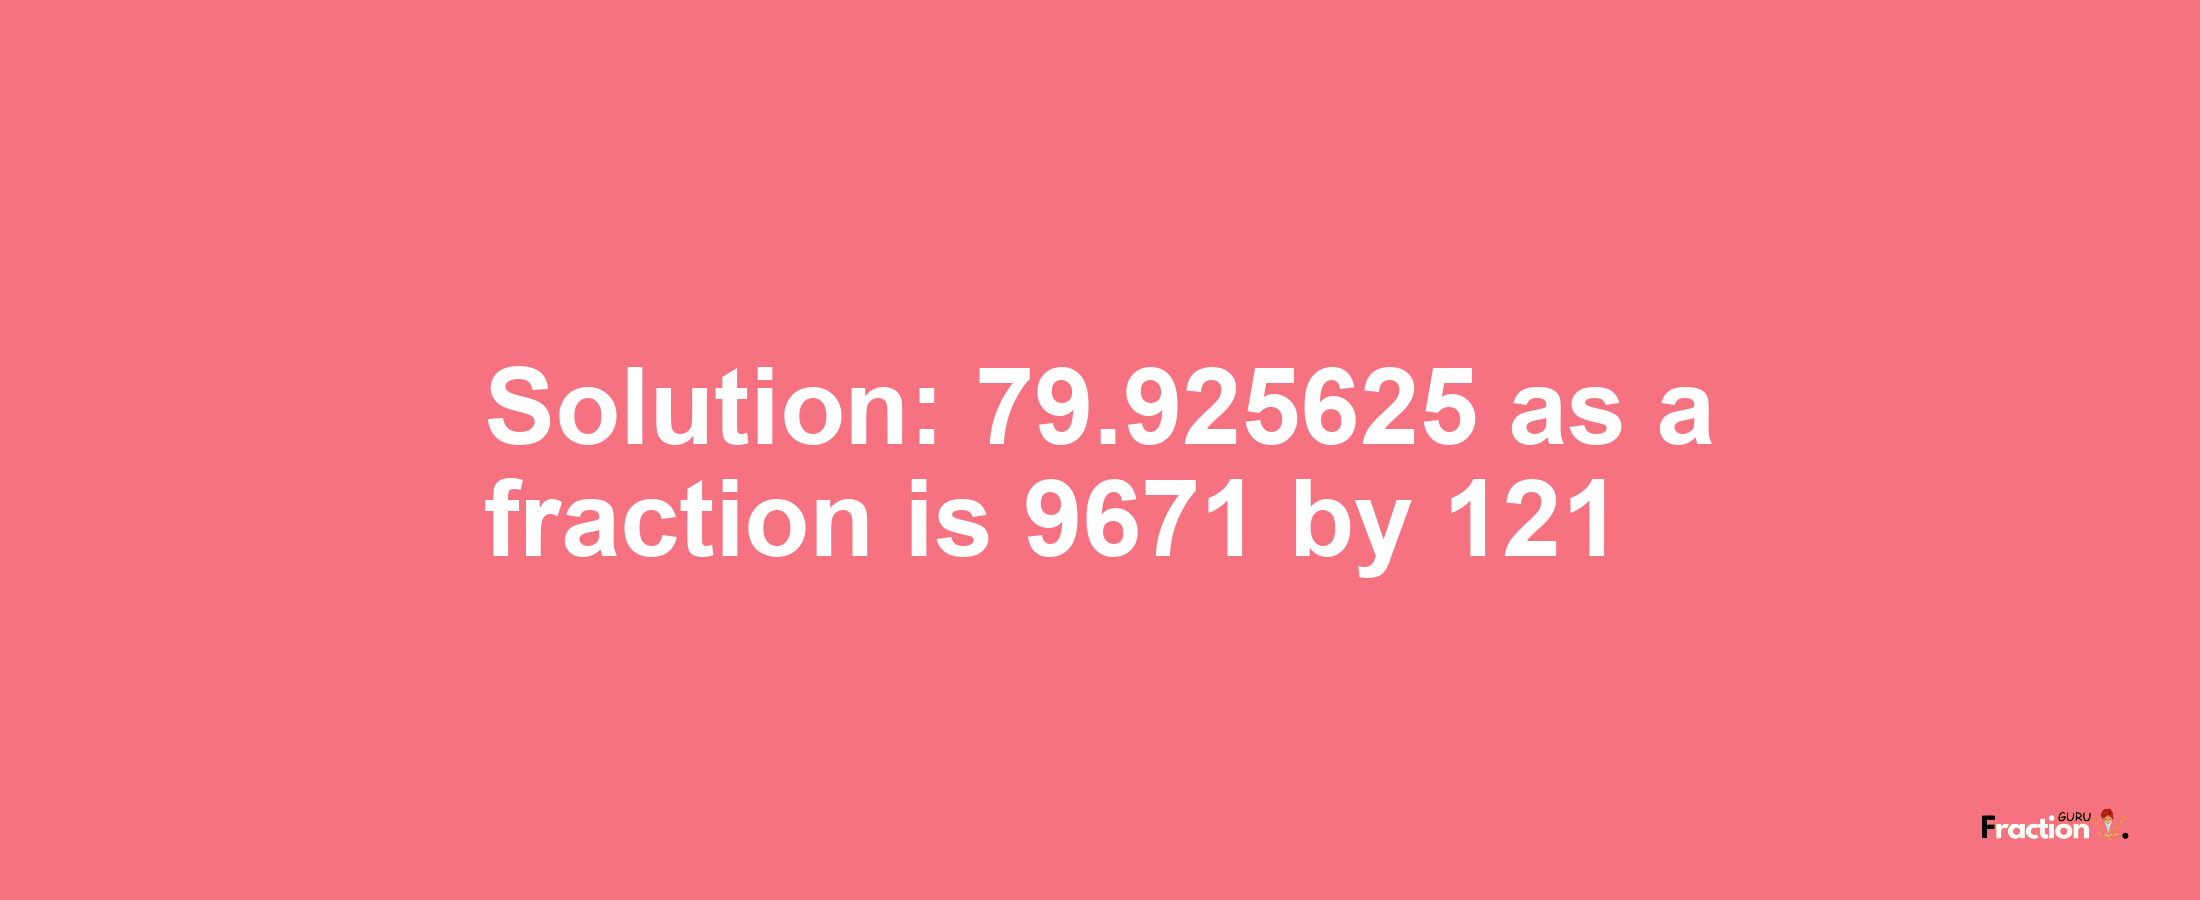 Solution:79.925625 as a fraction is 9671/121